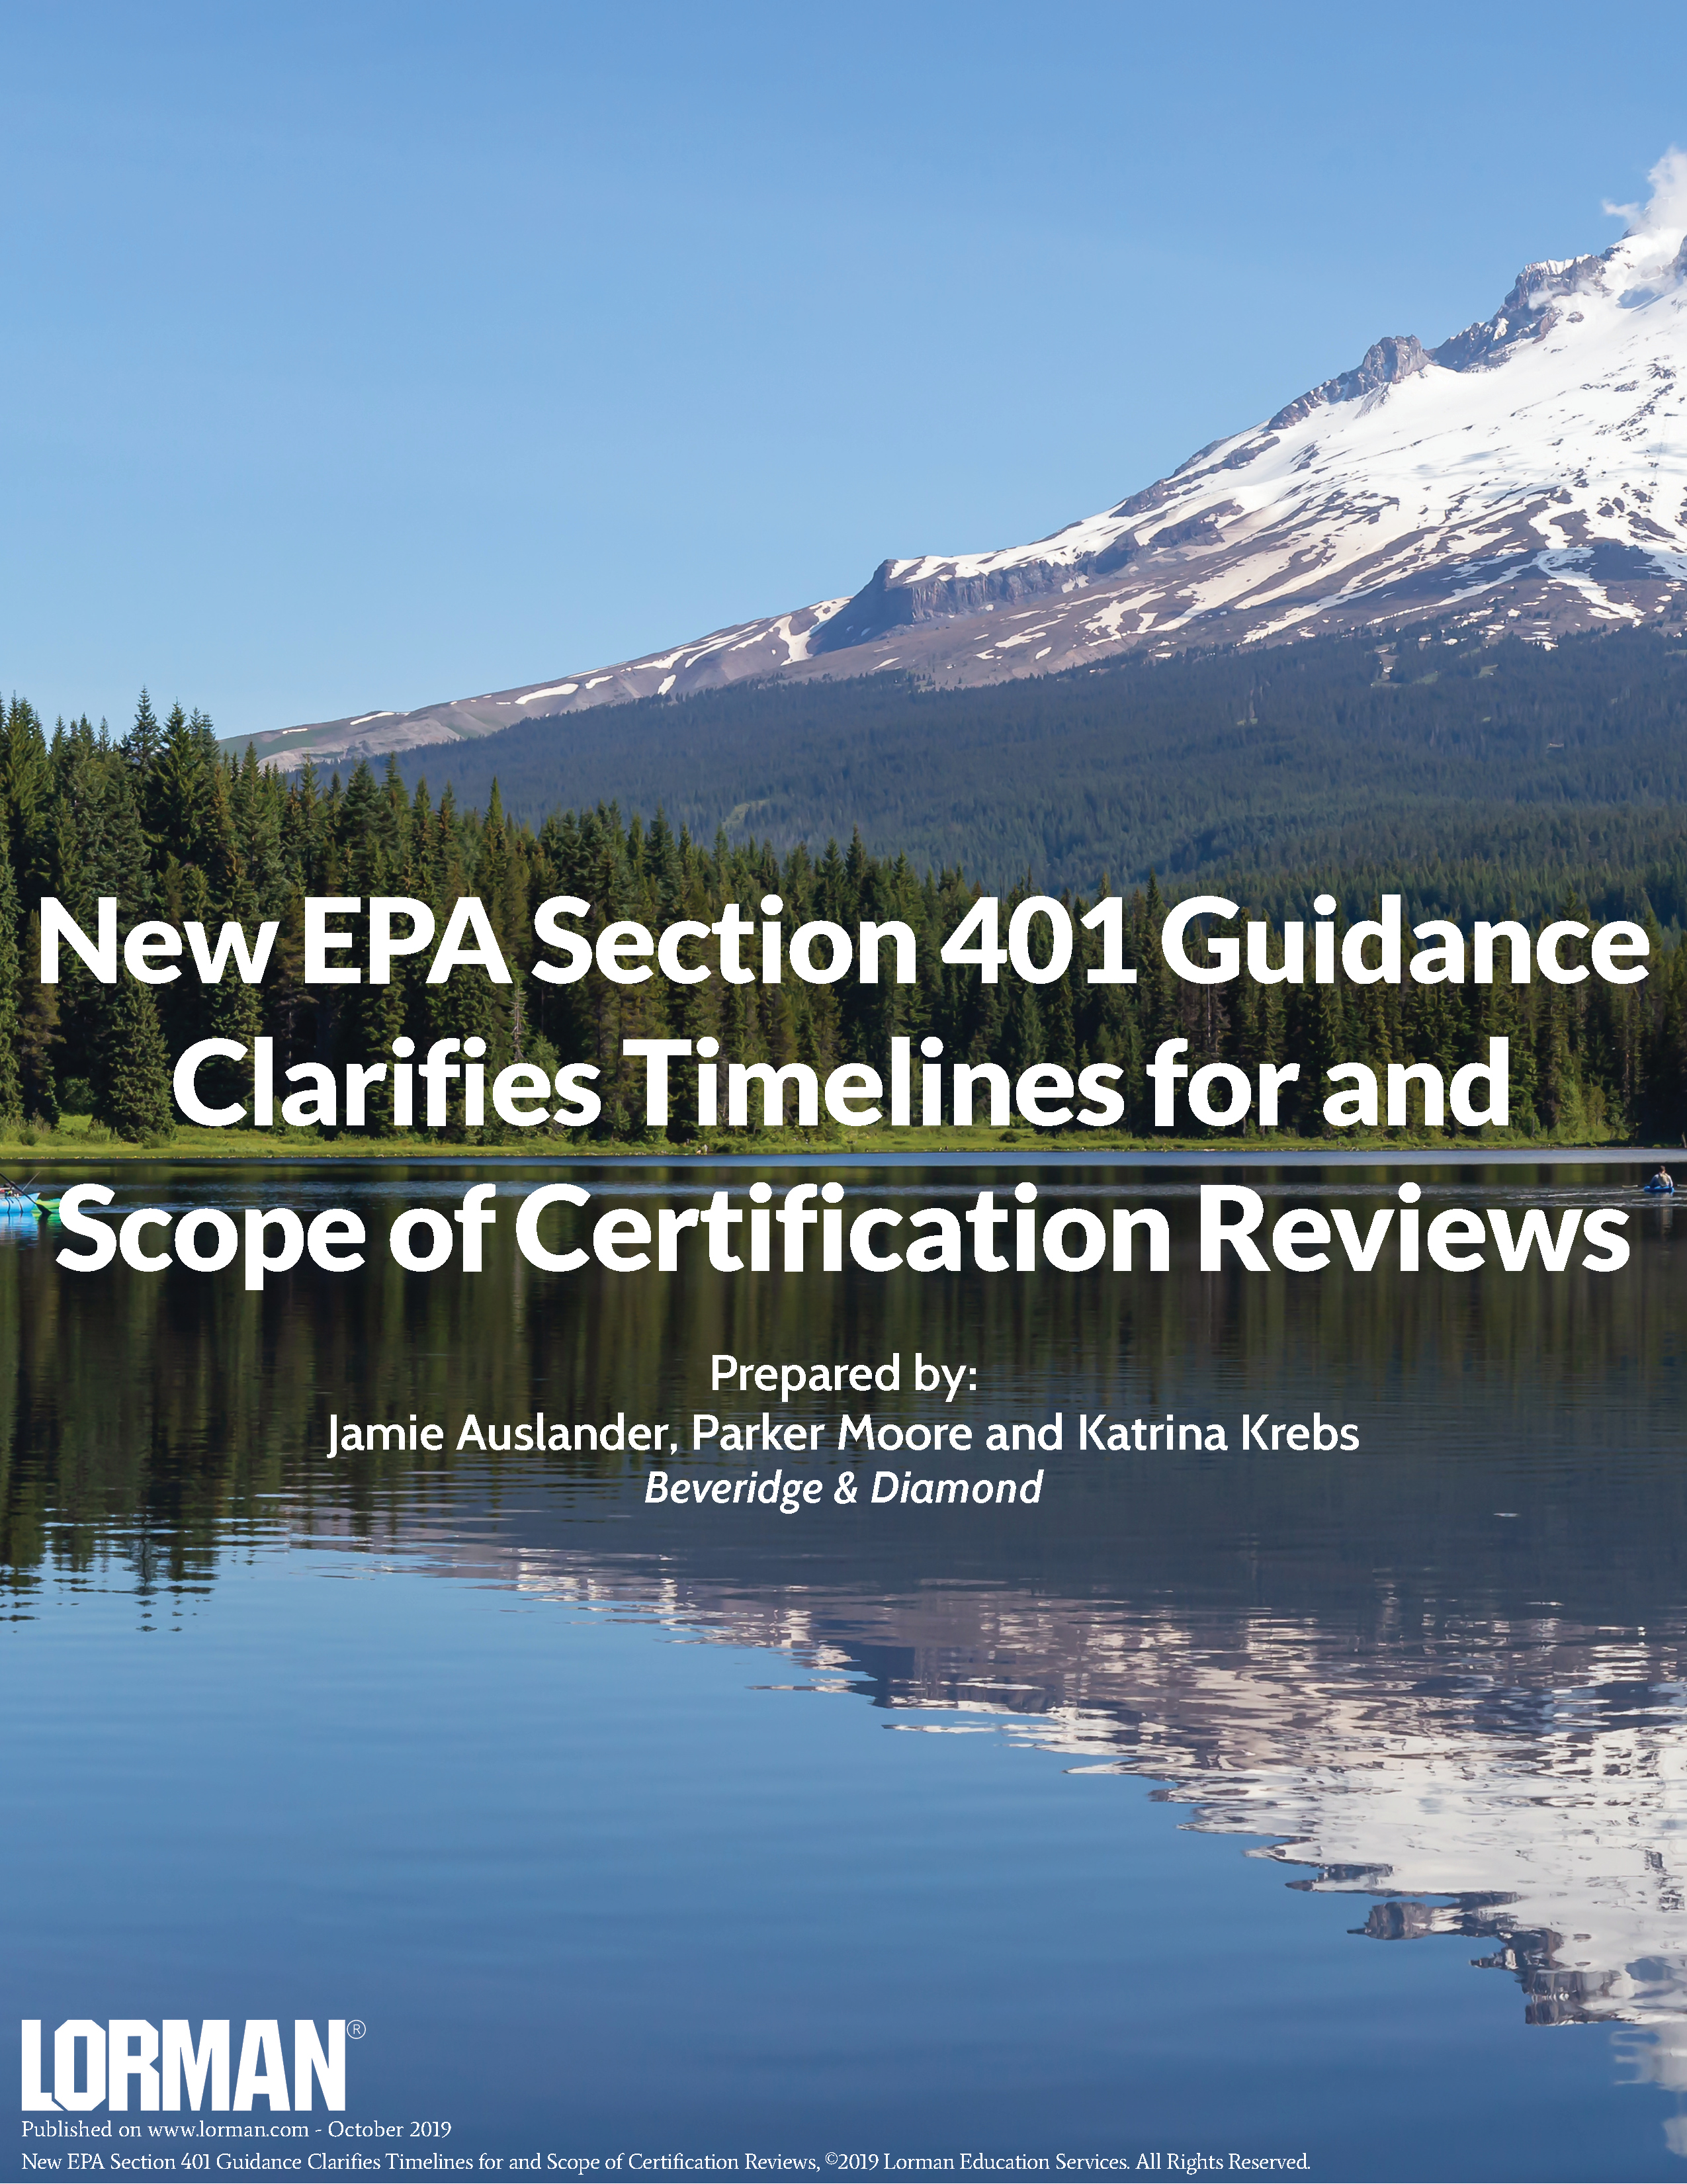 New EPA Section 401 Guidance Clarifies Timelines for and Scope of Certification Reviews